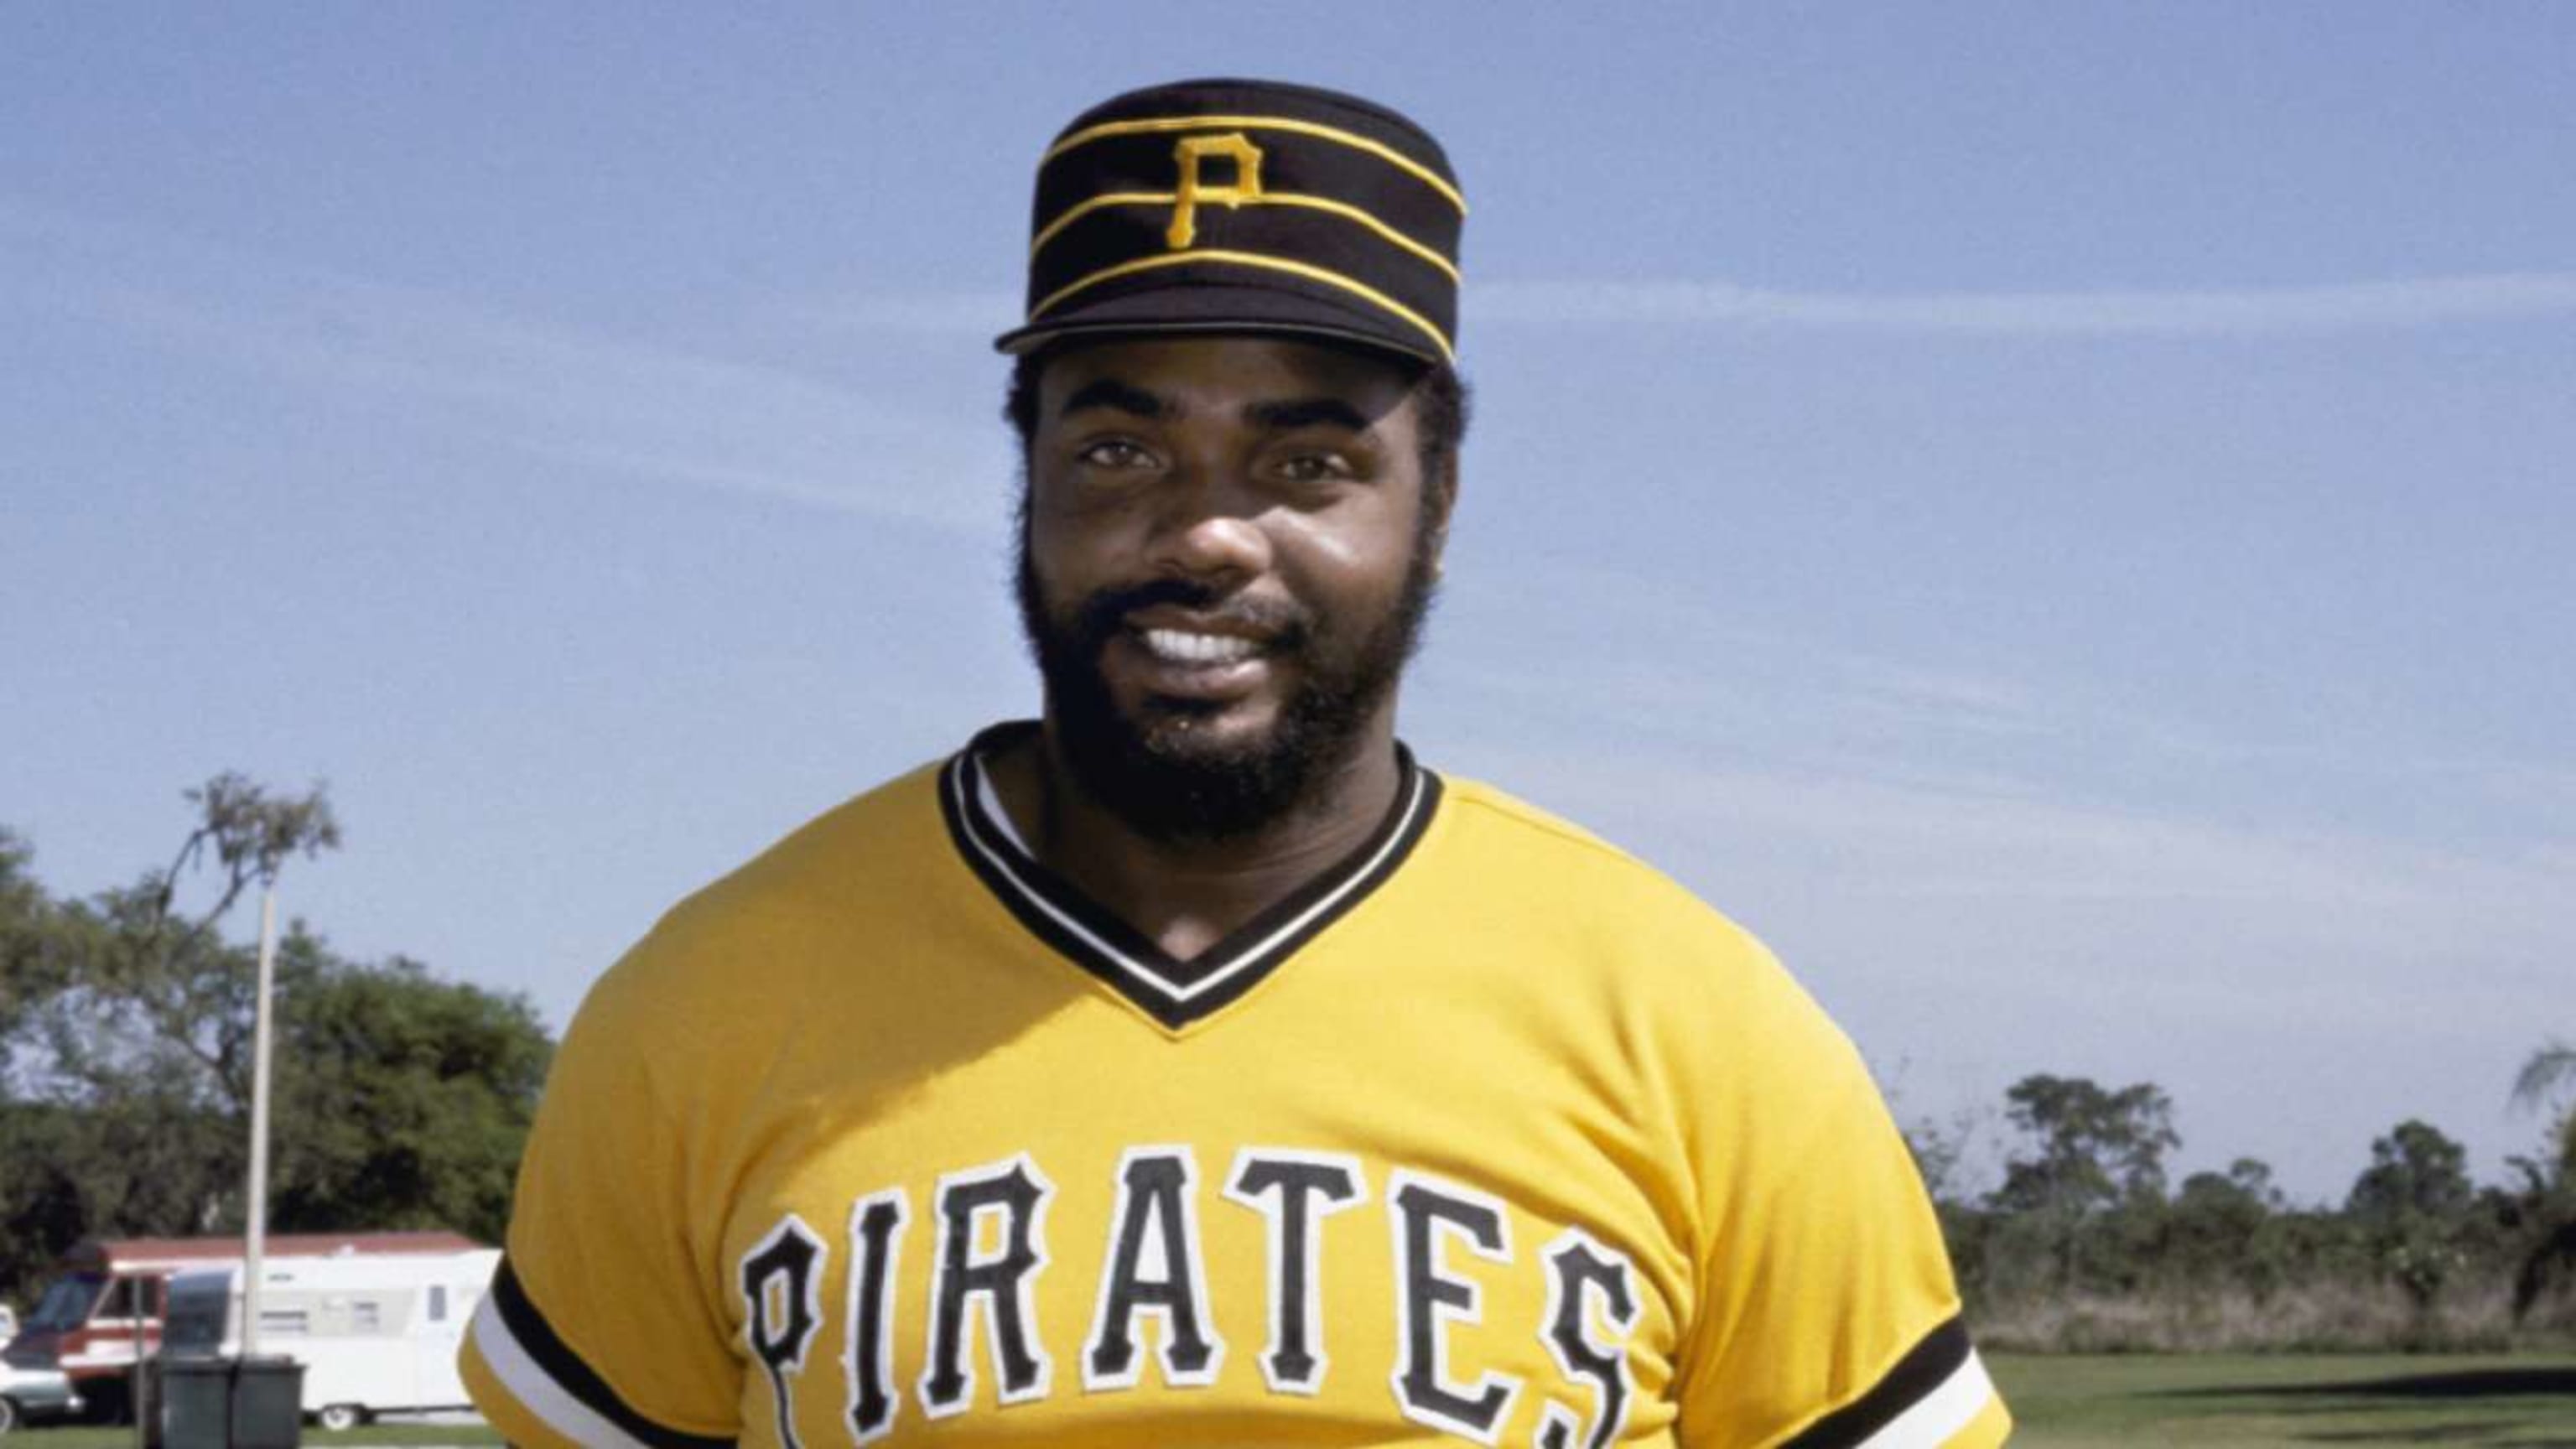 Dave Parker thrived, entertained in MLB career